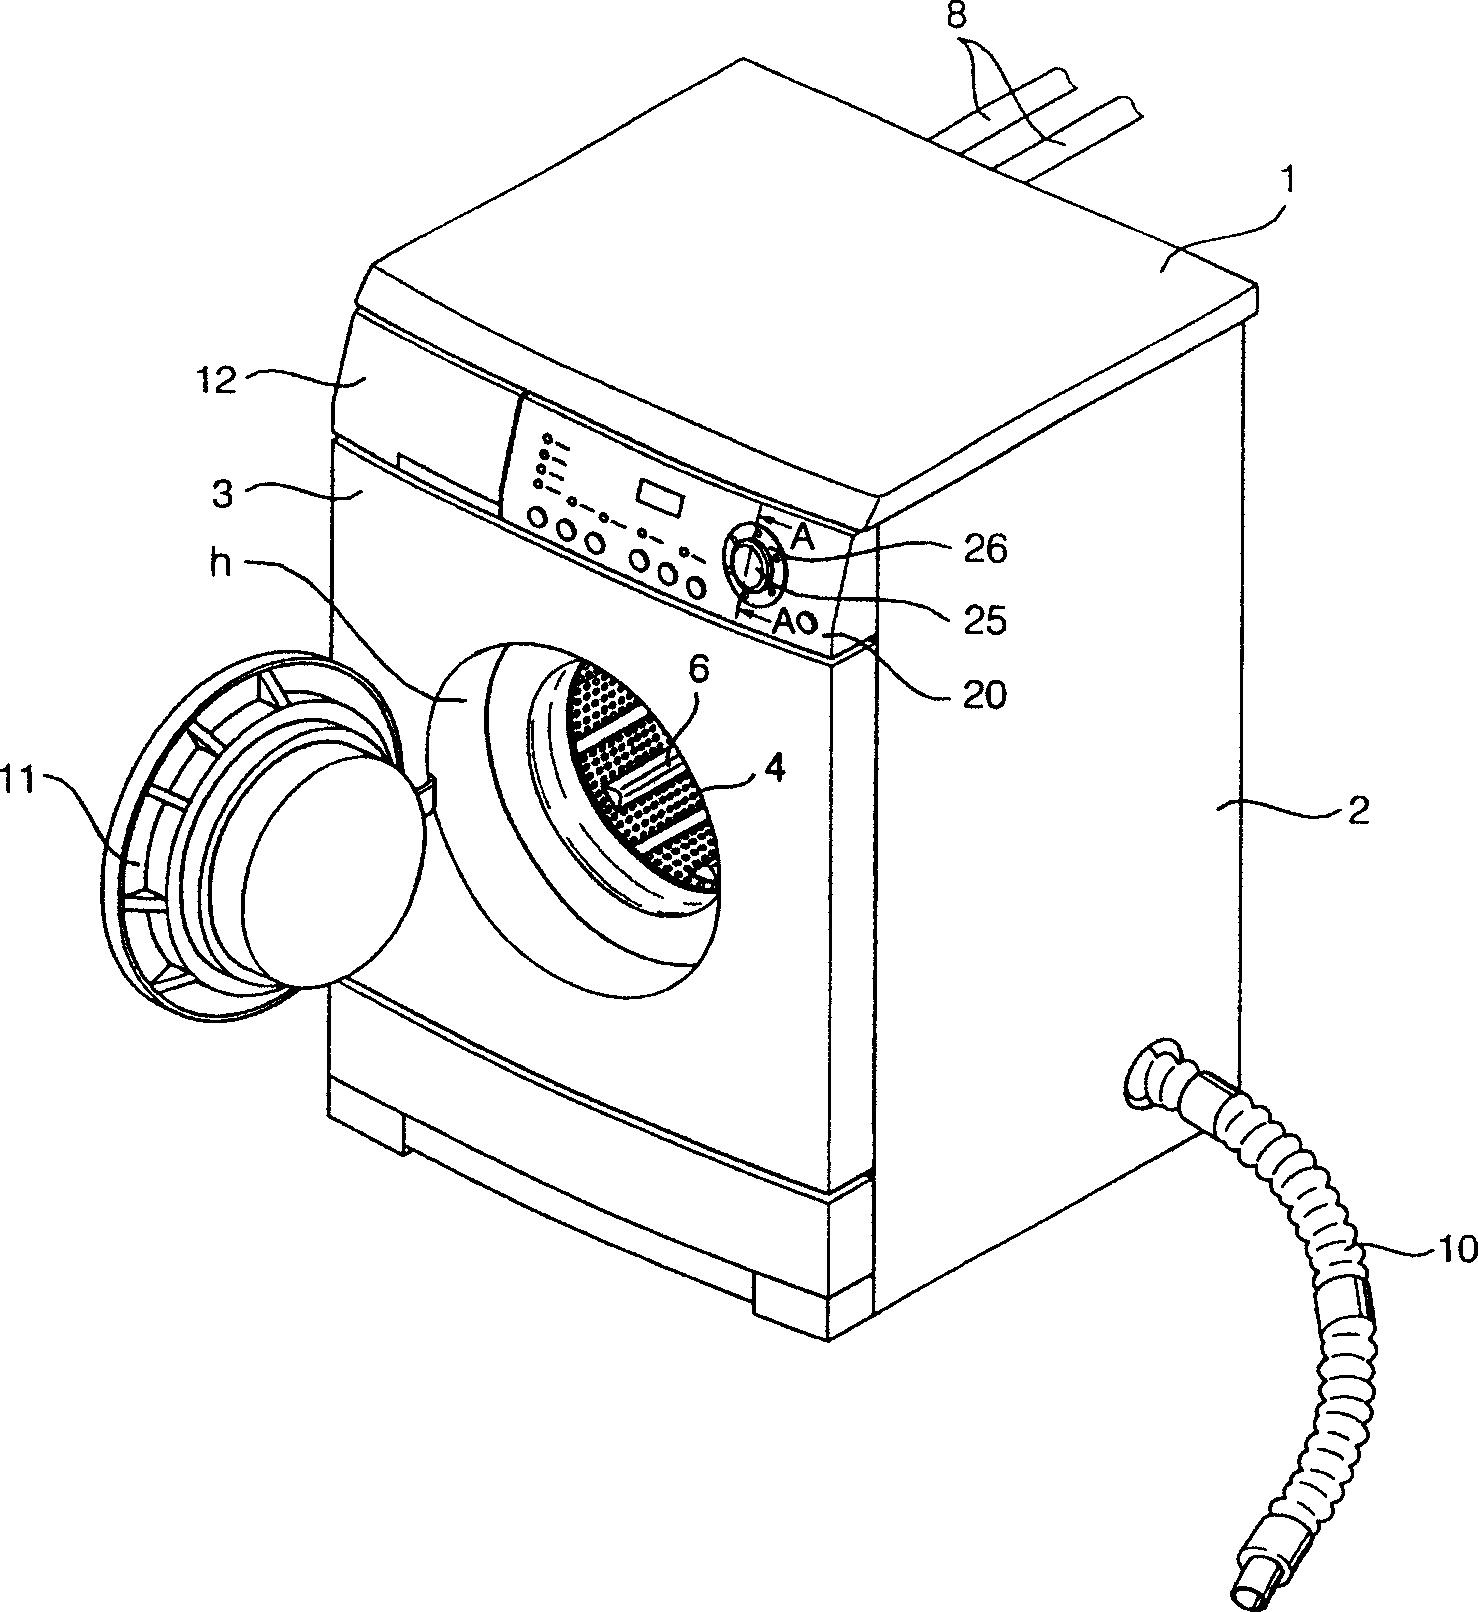 Controller device of washing machine